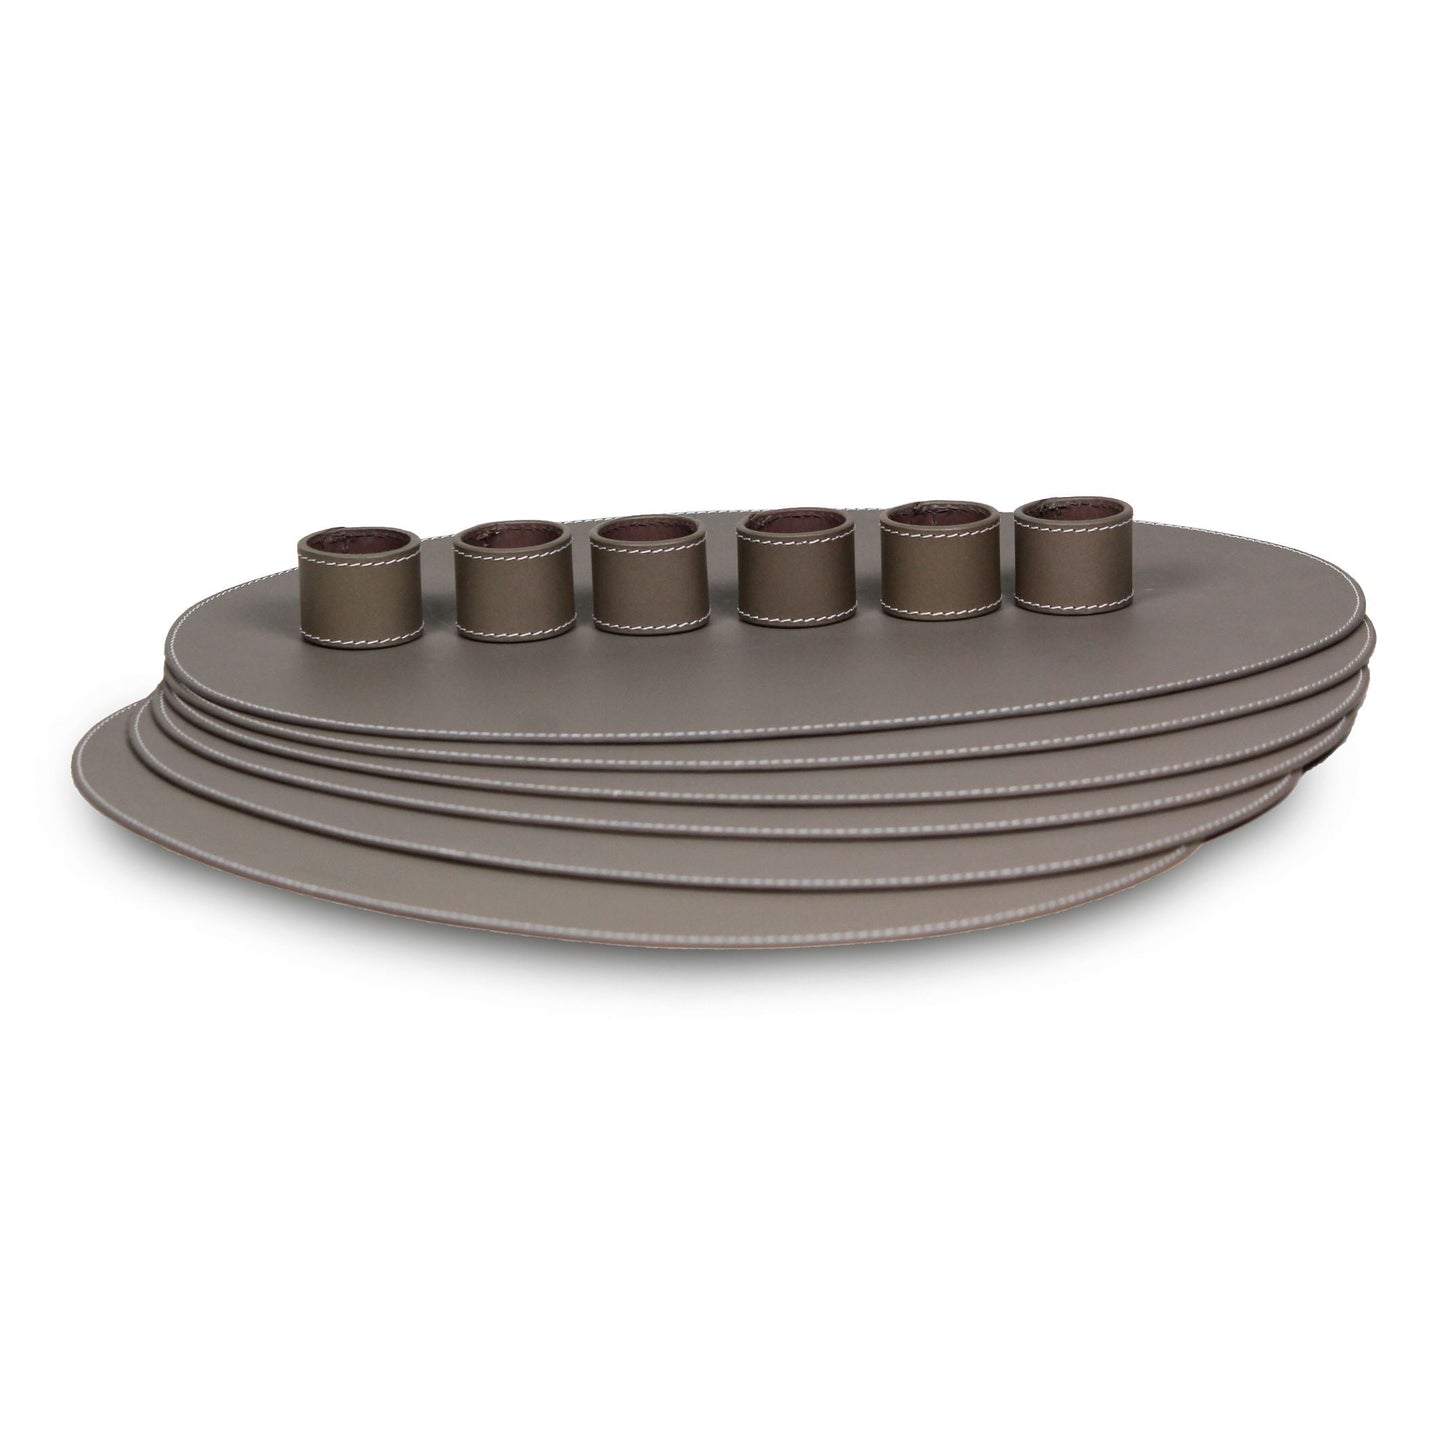 Napkin Holder & Placemats Set Of 4 Taupe